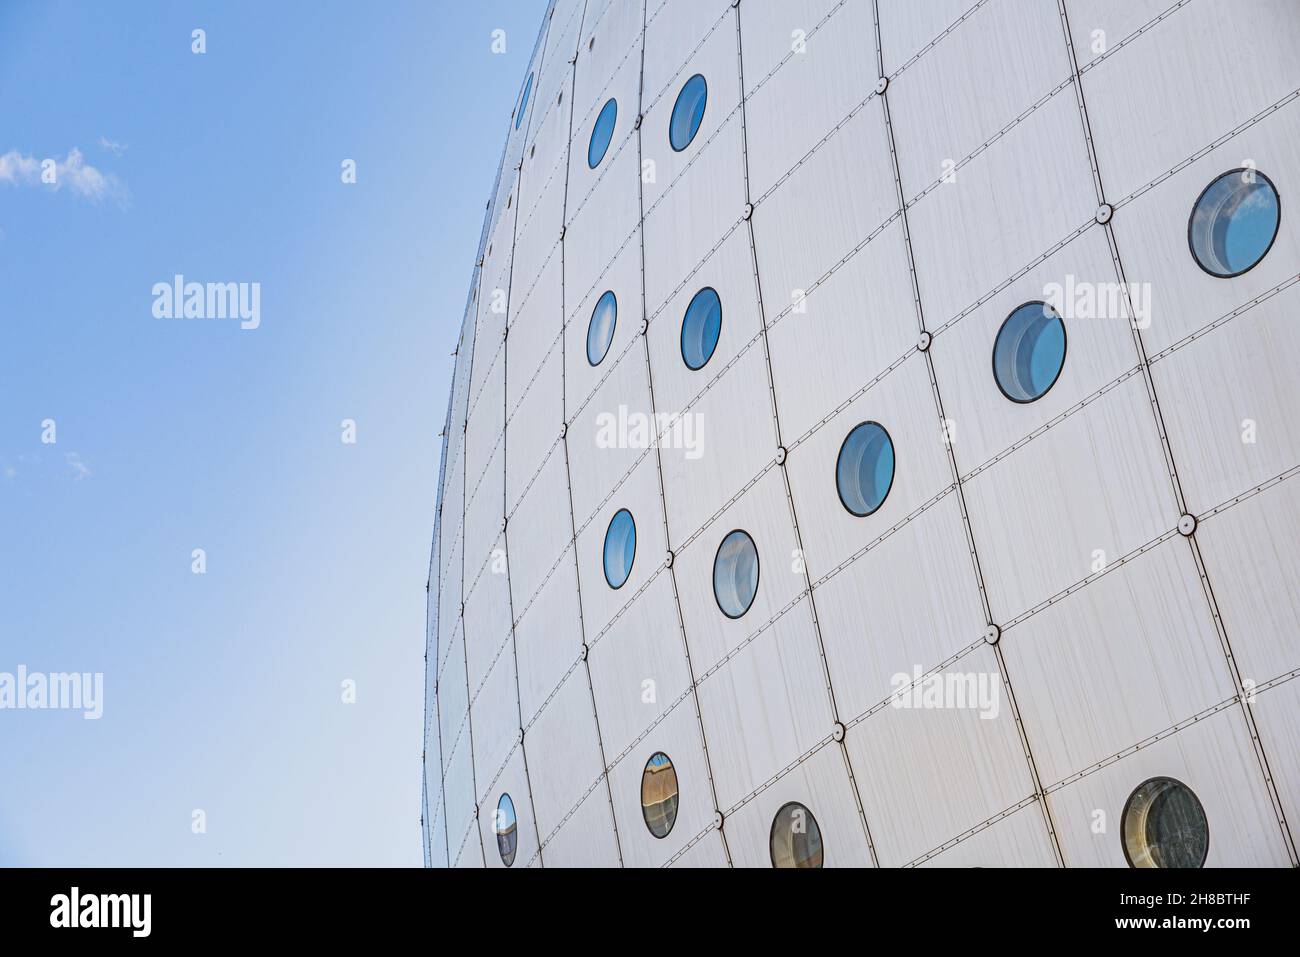 Facade detail of contemporary spherical building with circular windows or portholes shows a quirk architectural building shape. Business concept Stock Photo